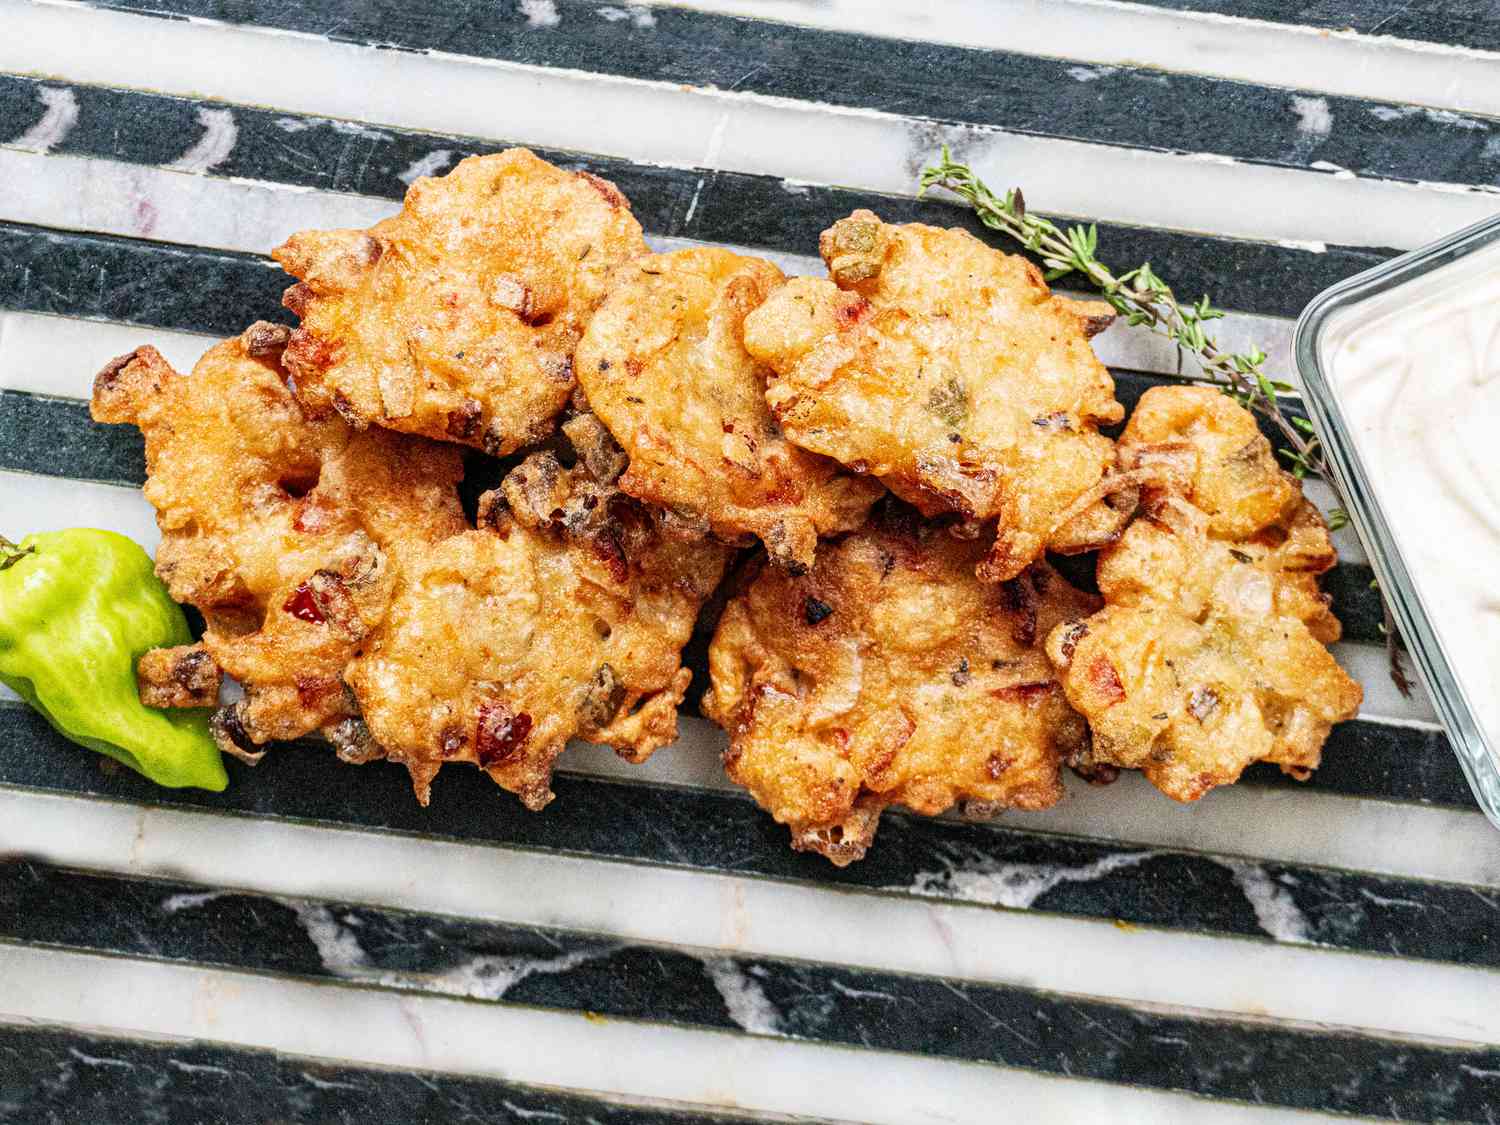 Savory fritters served with herbs and peppers.